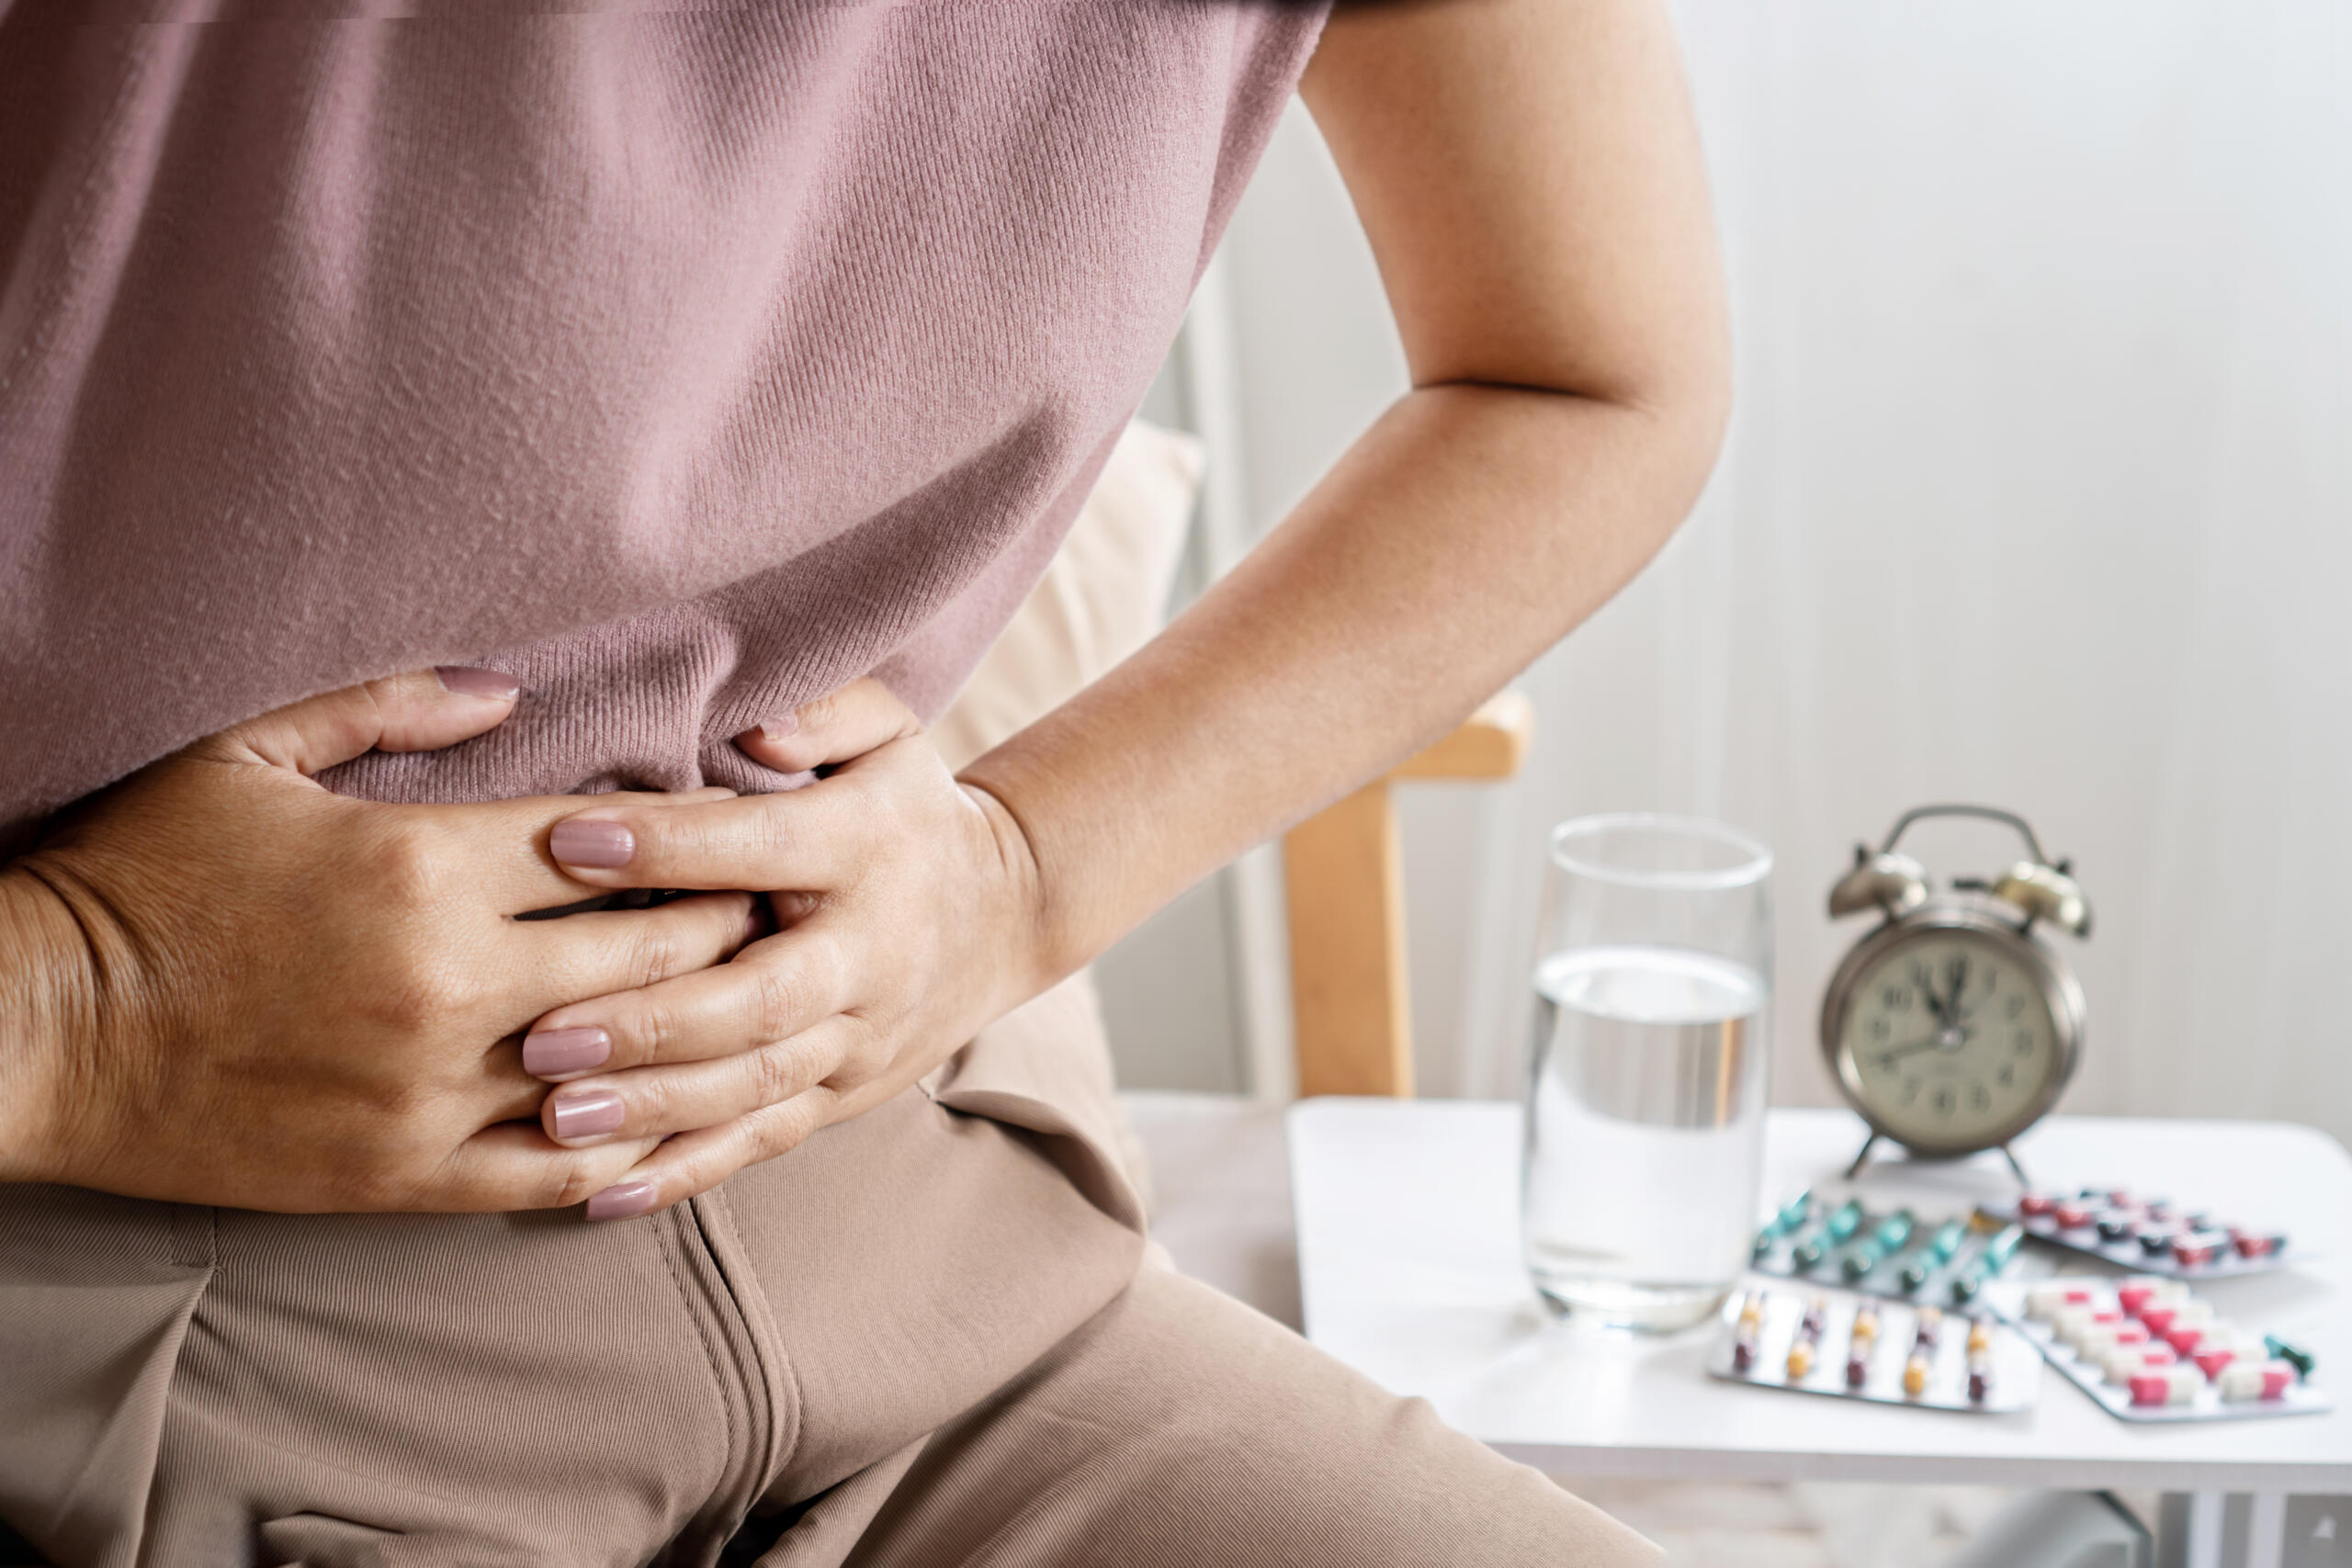 irritable bowel syndrome IBS concept with woman hand holding a stomachache having problems with the digestive system like diarrhea and constipation.